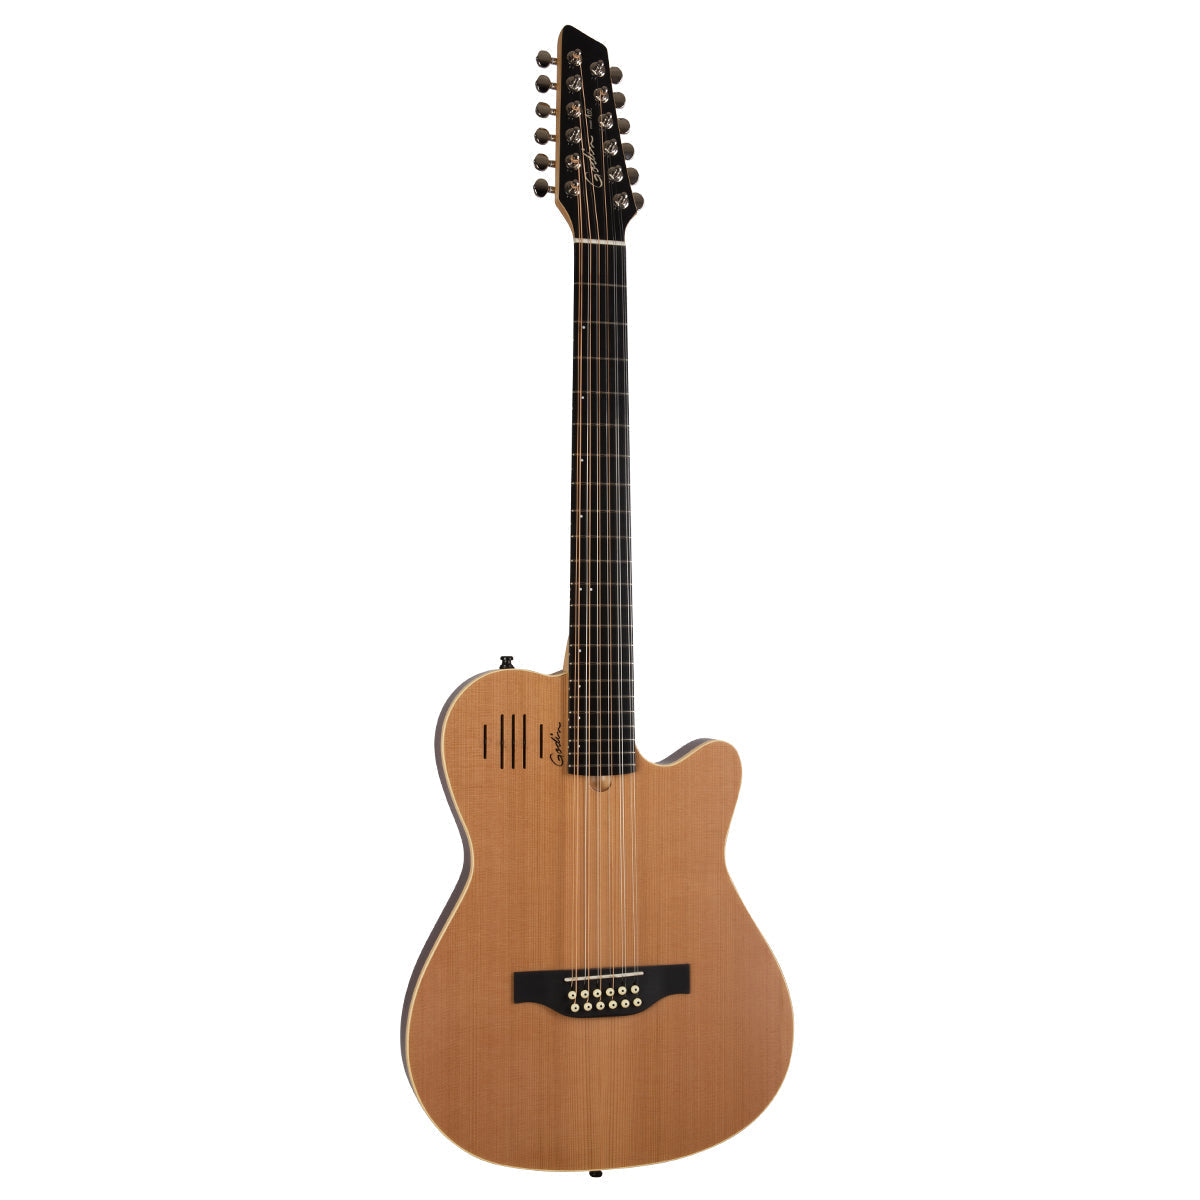 Godin A12 12 String Electric Guitar ~ Natural, Electric Guitars for sale at Richards Guitars.